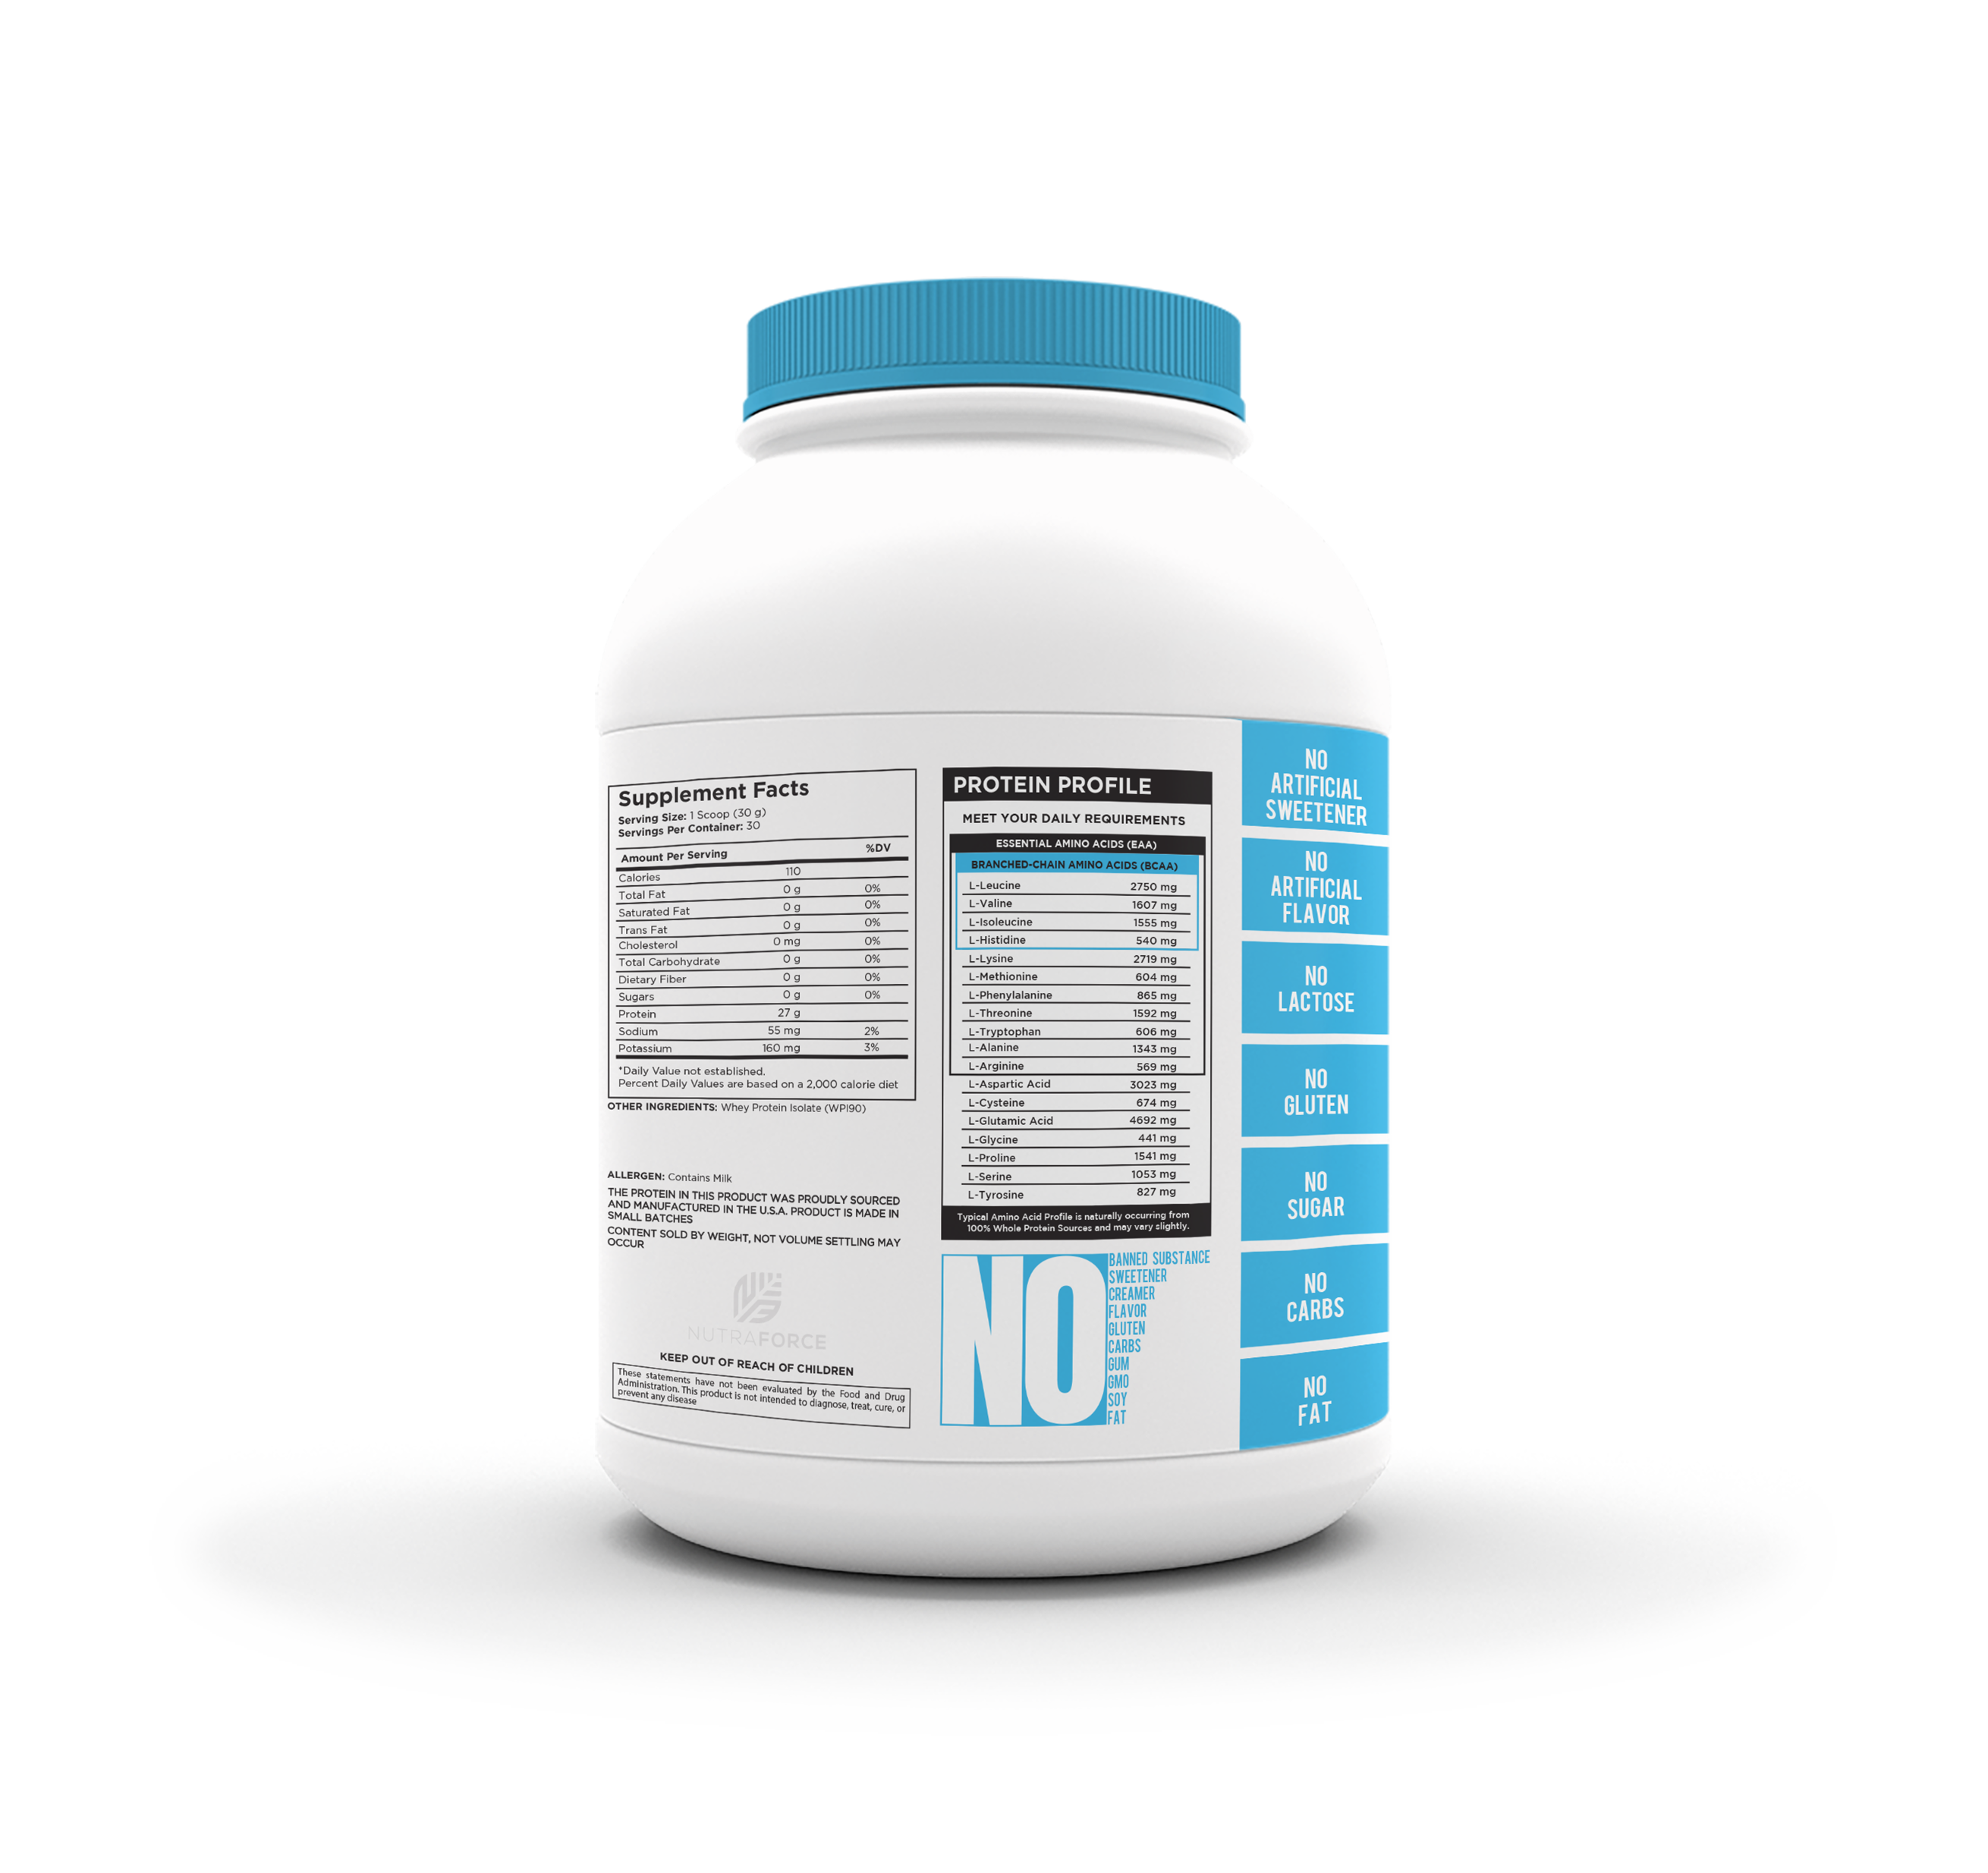 NUTRAFORCE FLAVORLESS ISOLATE PROTEINS 2LBS UNFLAVORED